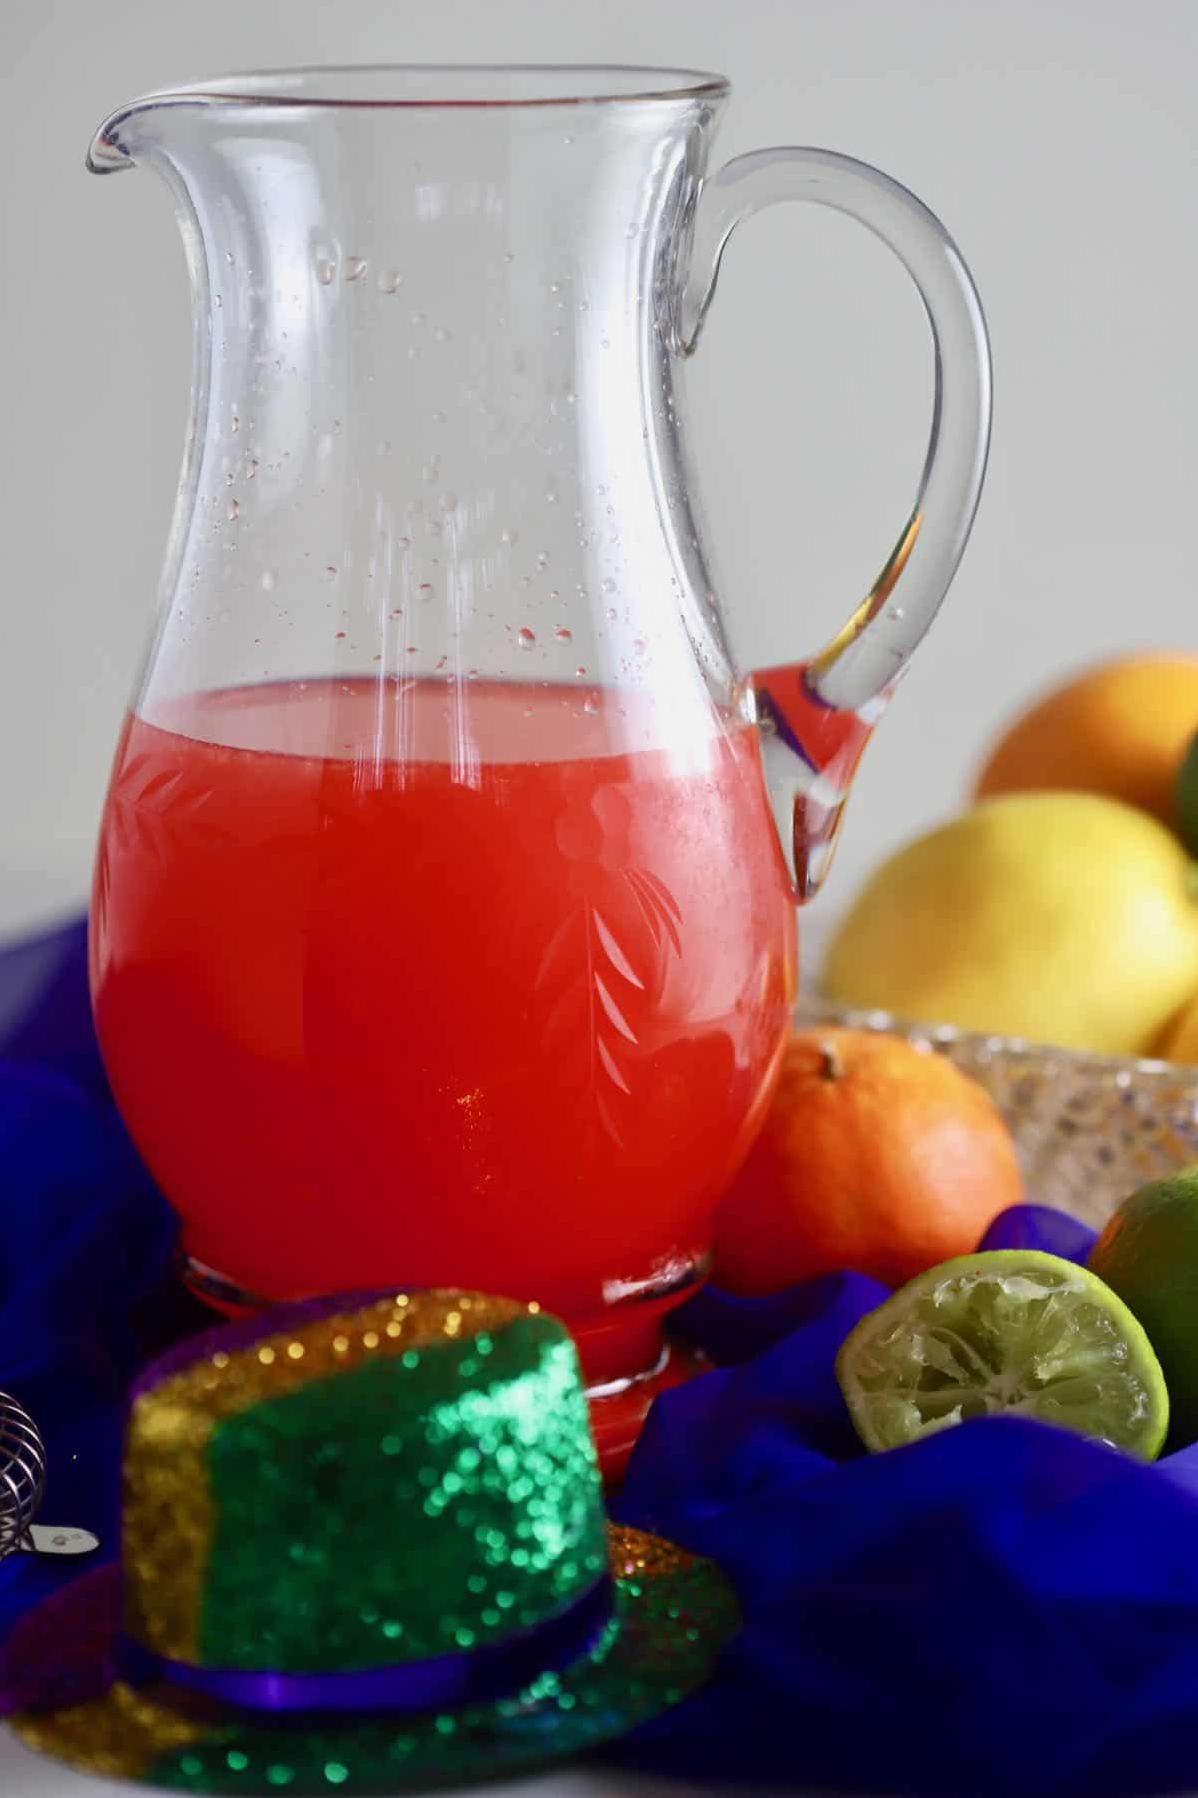 Drink up: Southern Hurricane Pitcher Recipe